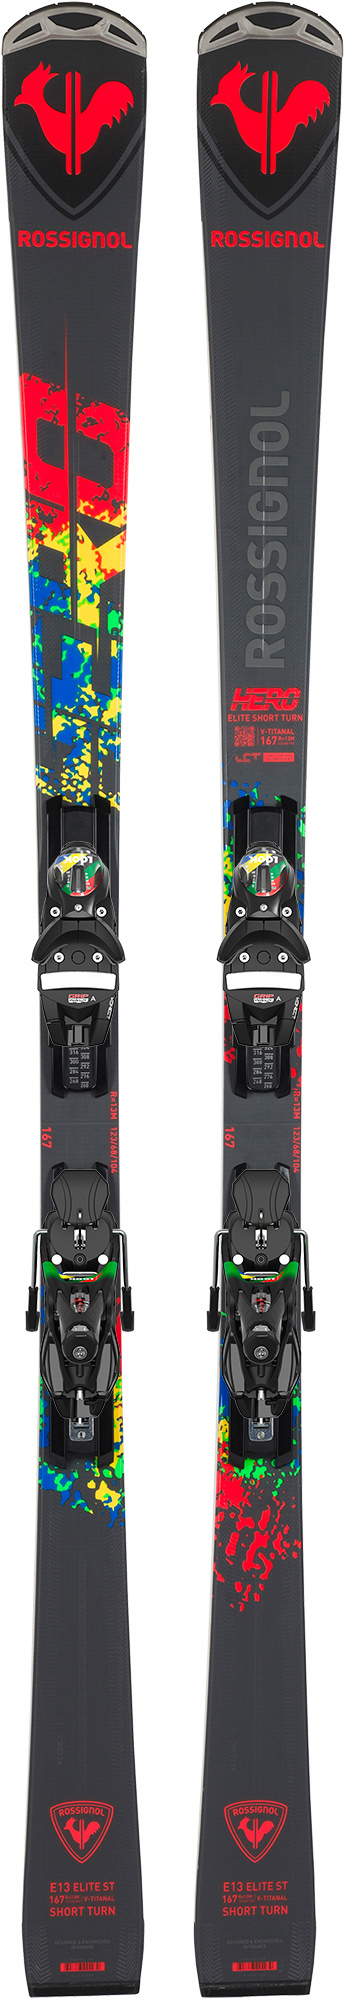 Edition) Elite Winter TI ST Rossignol (Limited – Goingsport